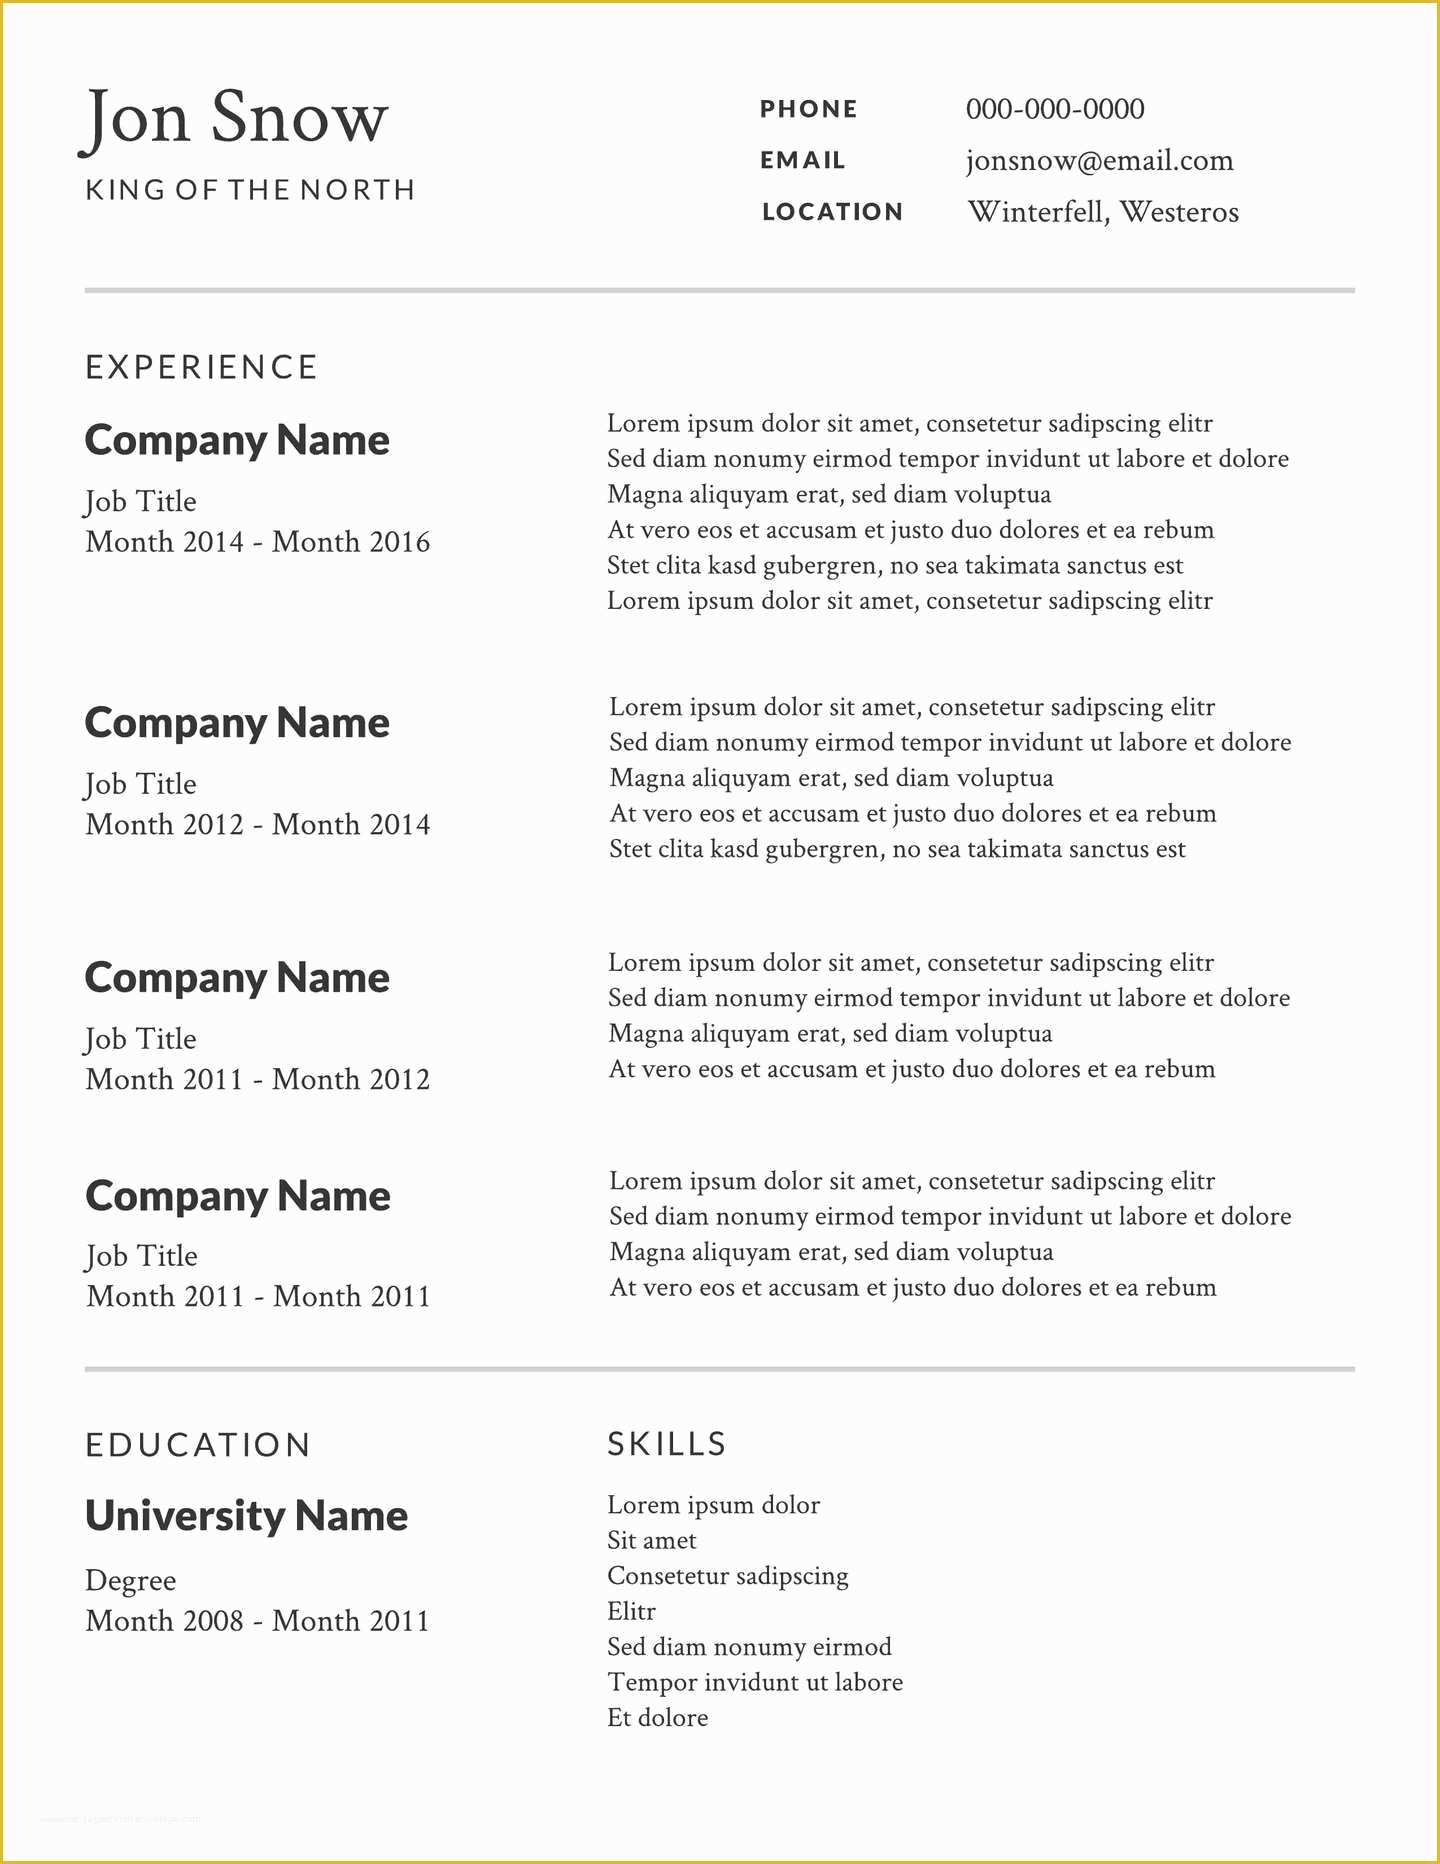 Free Professional Resume Templates Of 2 Free Resume Templates & Examples Lucidpress